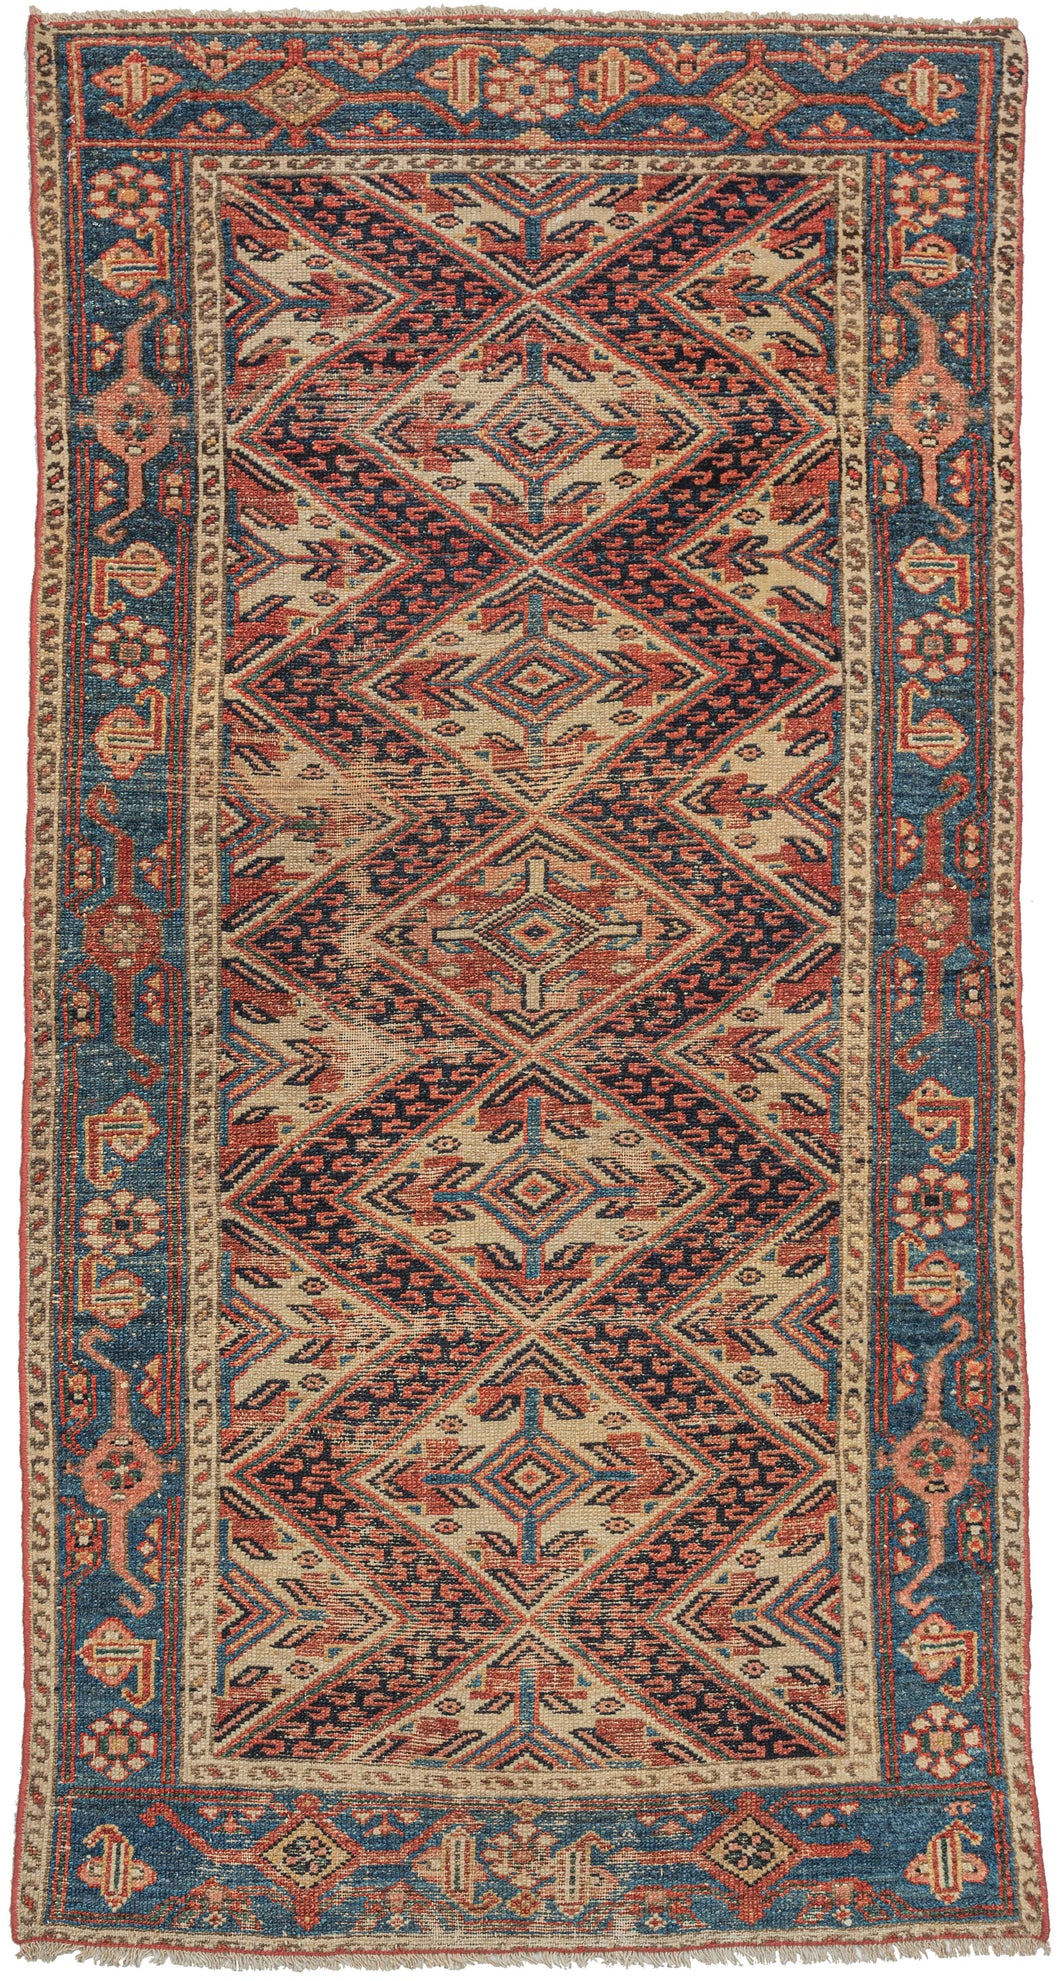 Antique Malayer small runner featuring a bright cream field with an undulating red & blue central diamond pattern. The lively field is framed by the main border of alternating long-armed palmettes and what appear to be heavily stylized butterflies or dragonflies on a stunning indigo ground. The main border is flanked by bright cream minor borders with repeating 